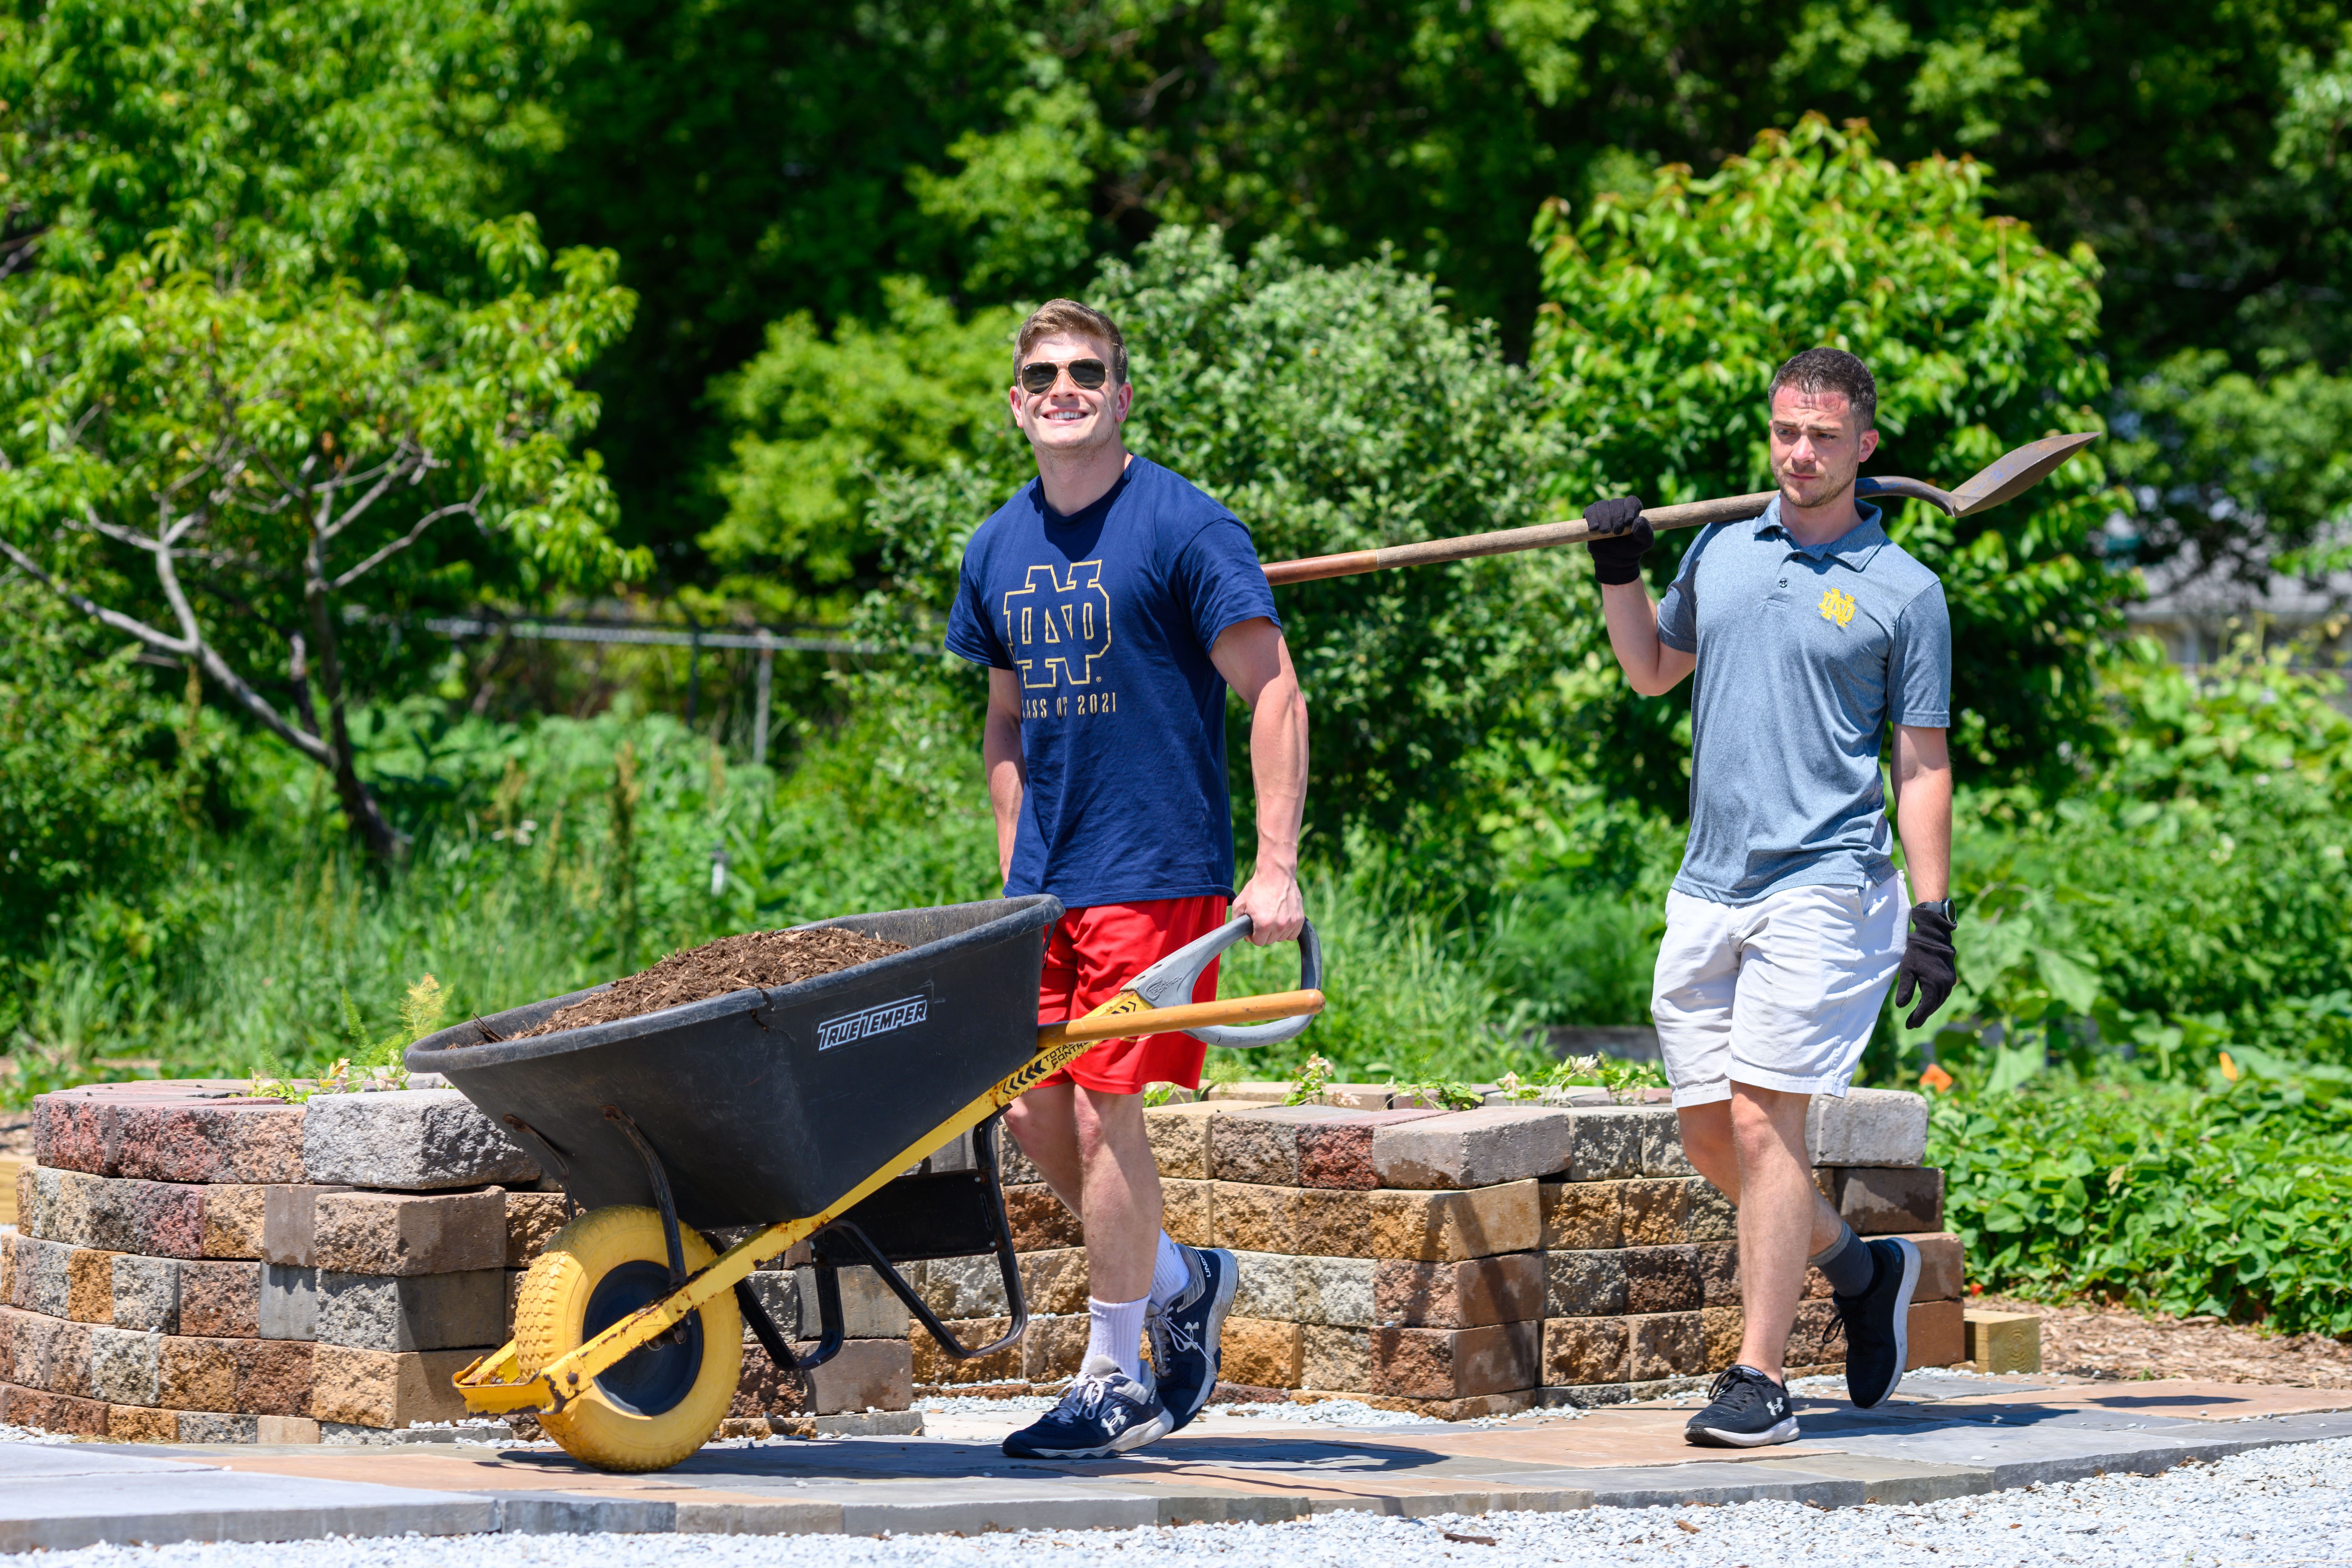 June 16, 2021; Master of Science in Management (MSM) students do service work at Unity Gardens in South Bend. (Photo by Matt Cashore/University of Notre Dame)